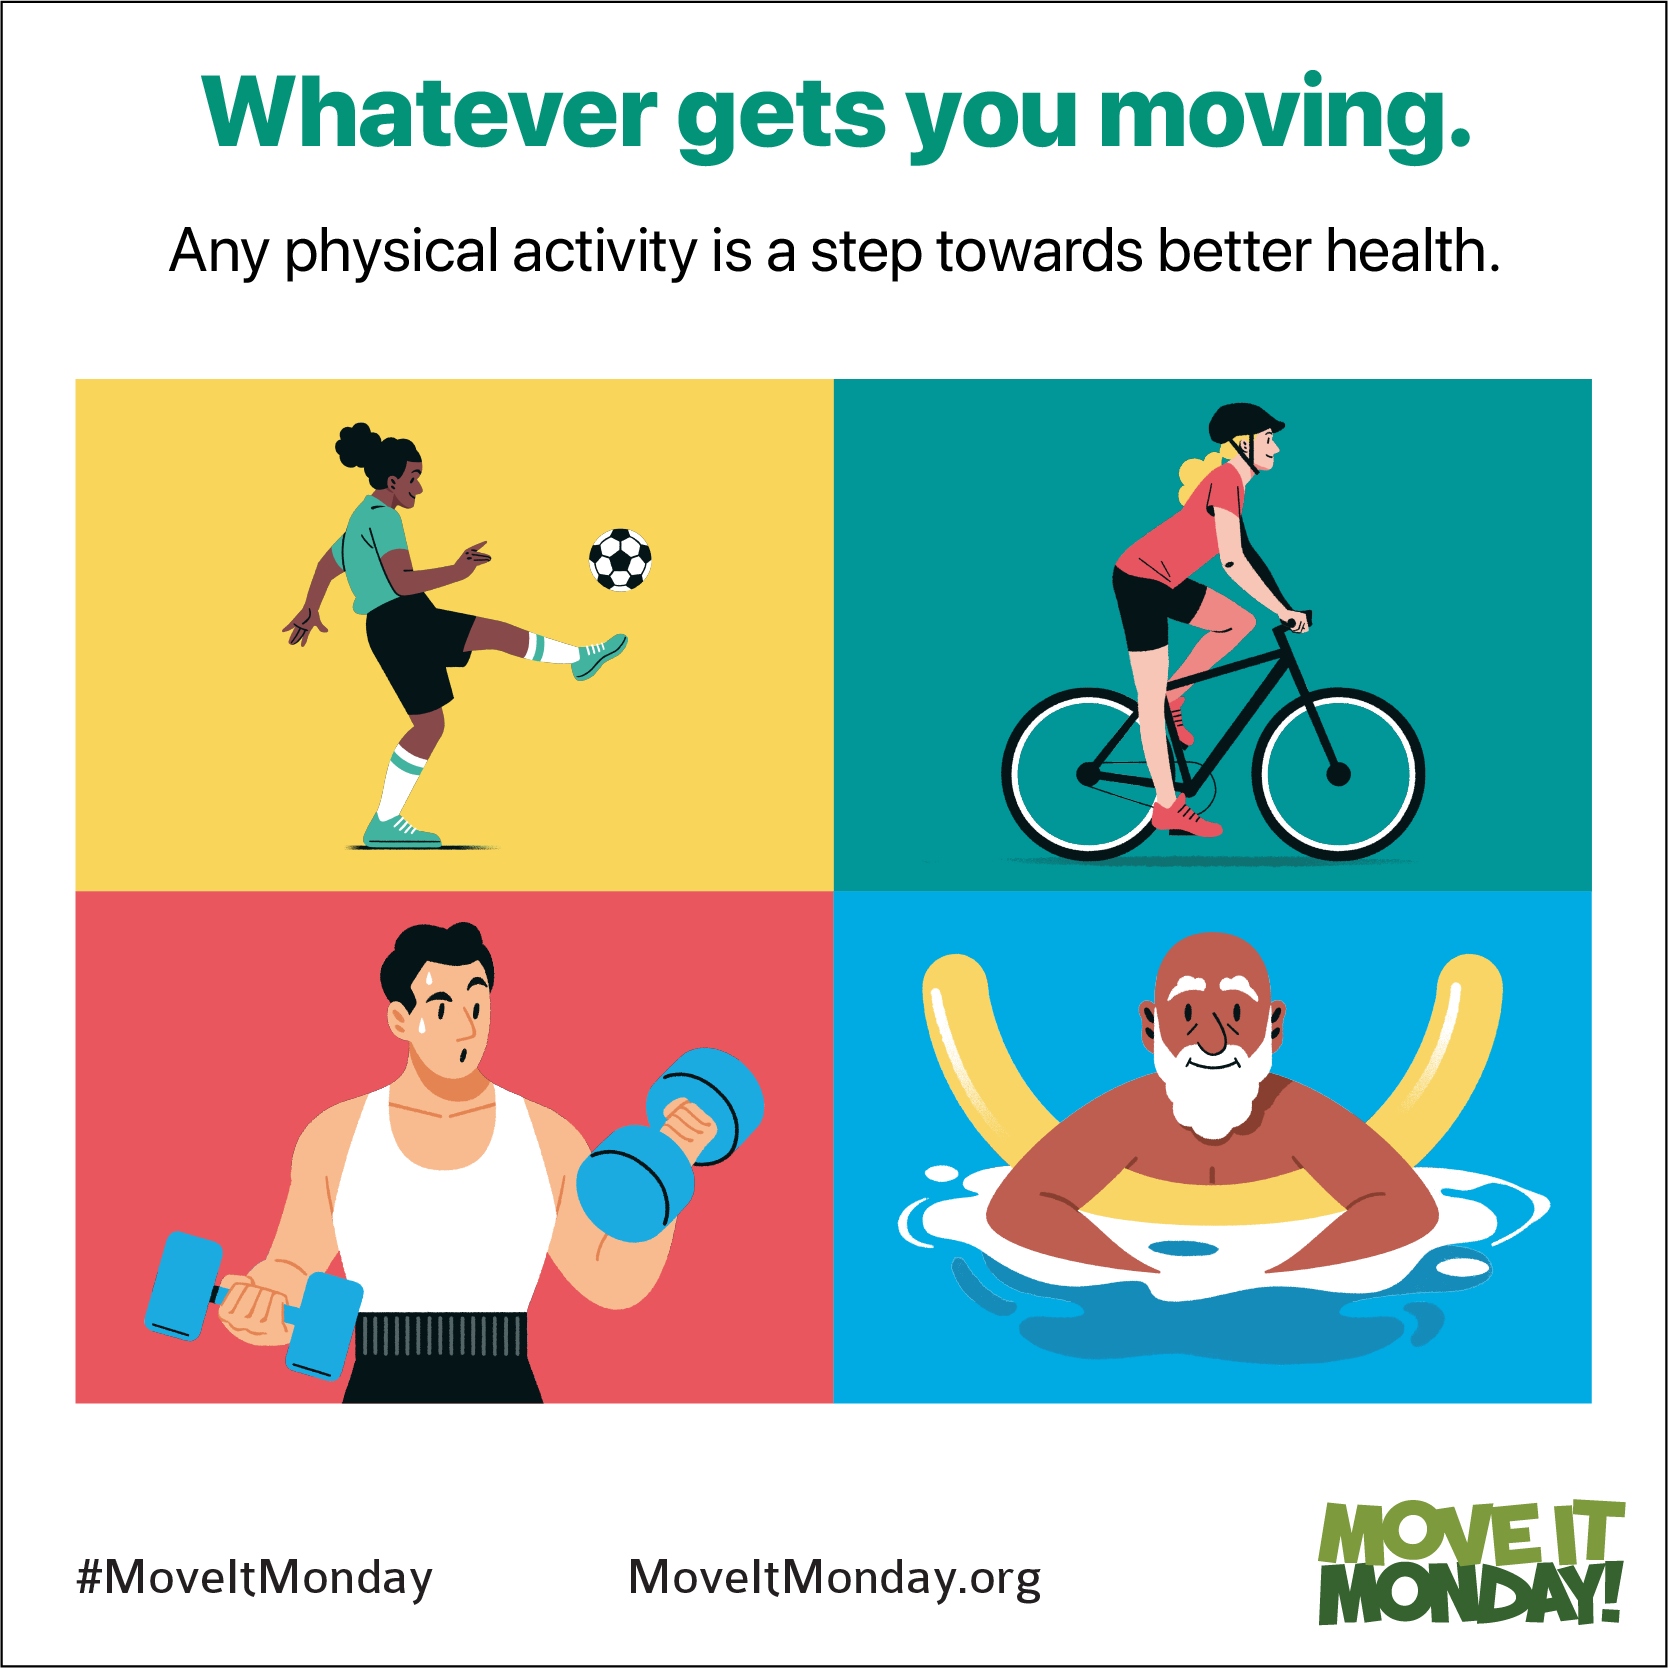 https://www.mondaycampaigns.org/wp-content/uploads/2021/05/move-it-monday-graphic-intro-to-physical-activity.png